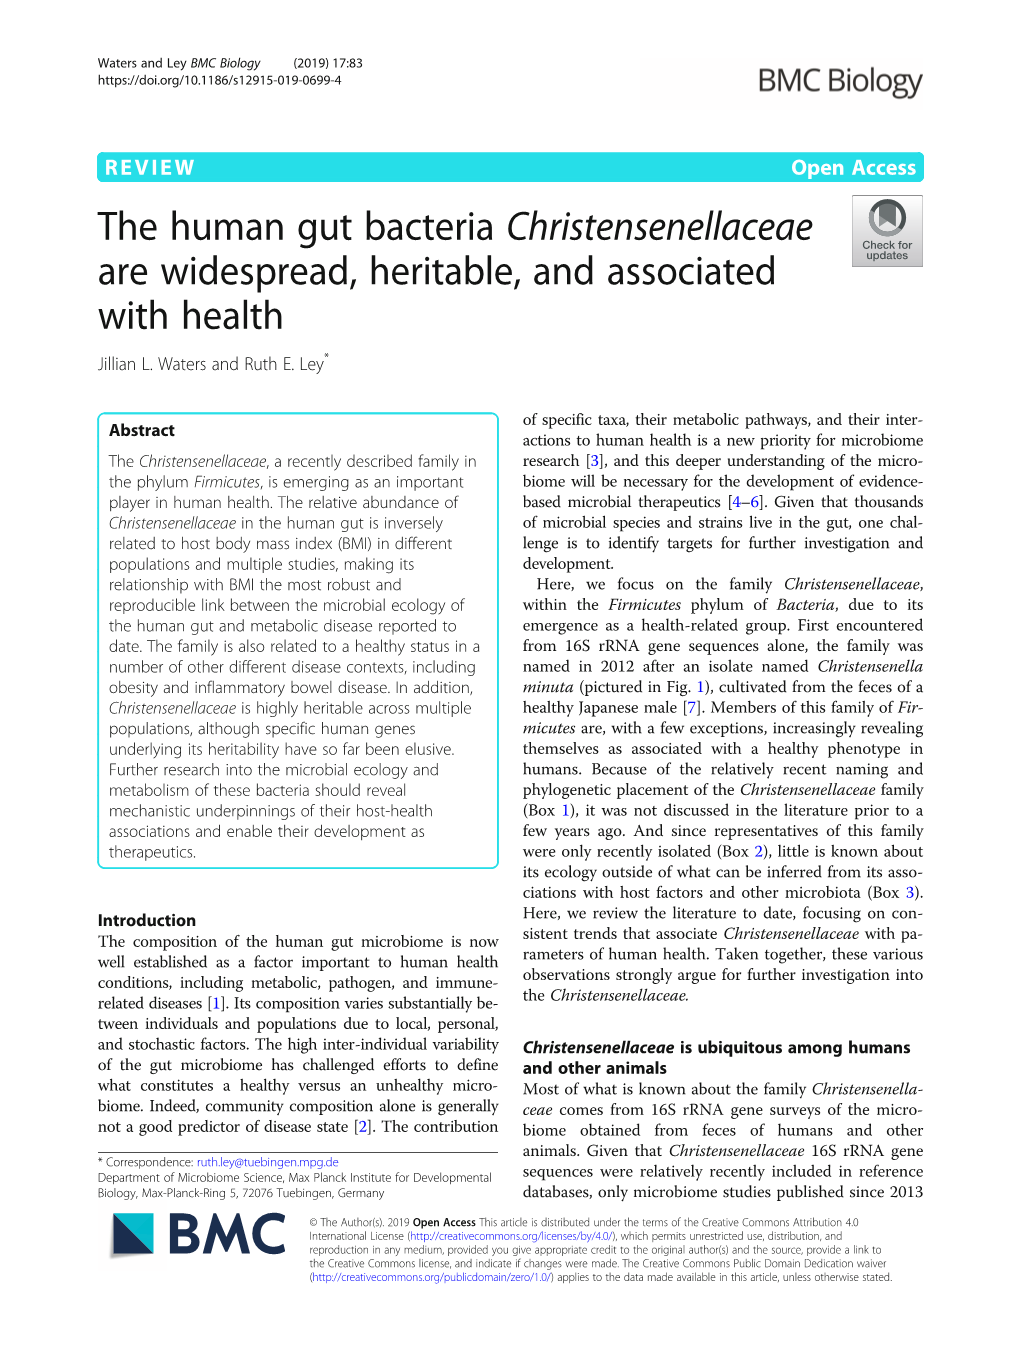 The Human Gut Bacteria Christensenellaceae Are Widespread, Heritable, and Associated with Health Jillian L